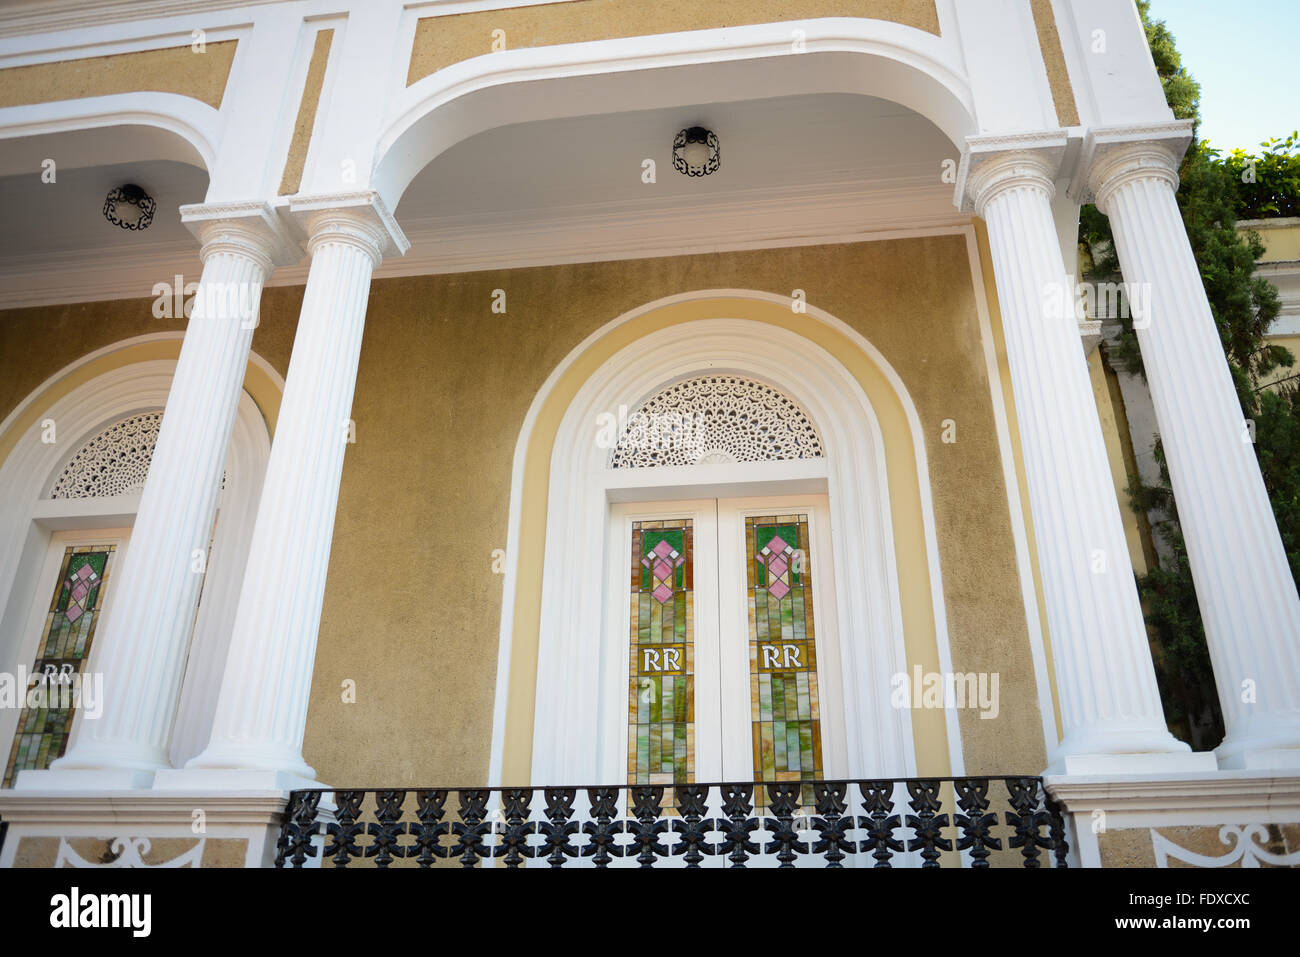 Facade of a house in the bucolic town of San German, Puerto Rico. Caribbean Island. US territory. Stock Photo